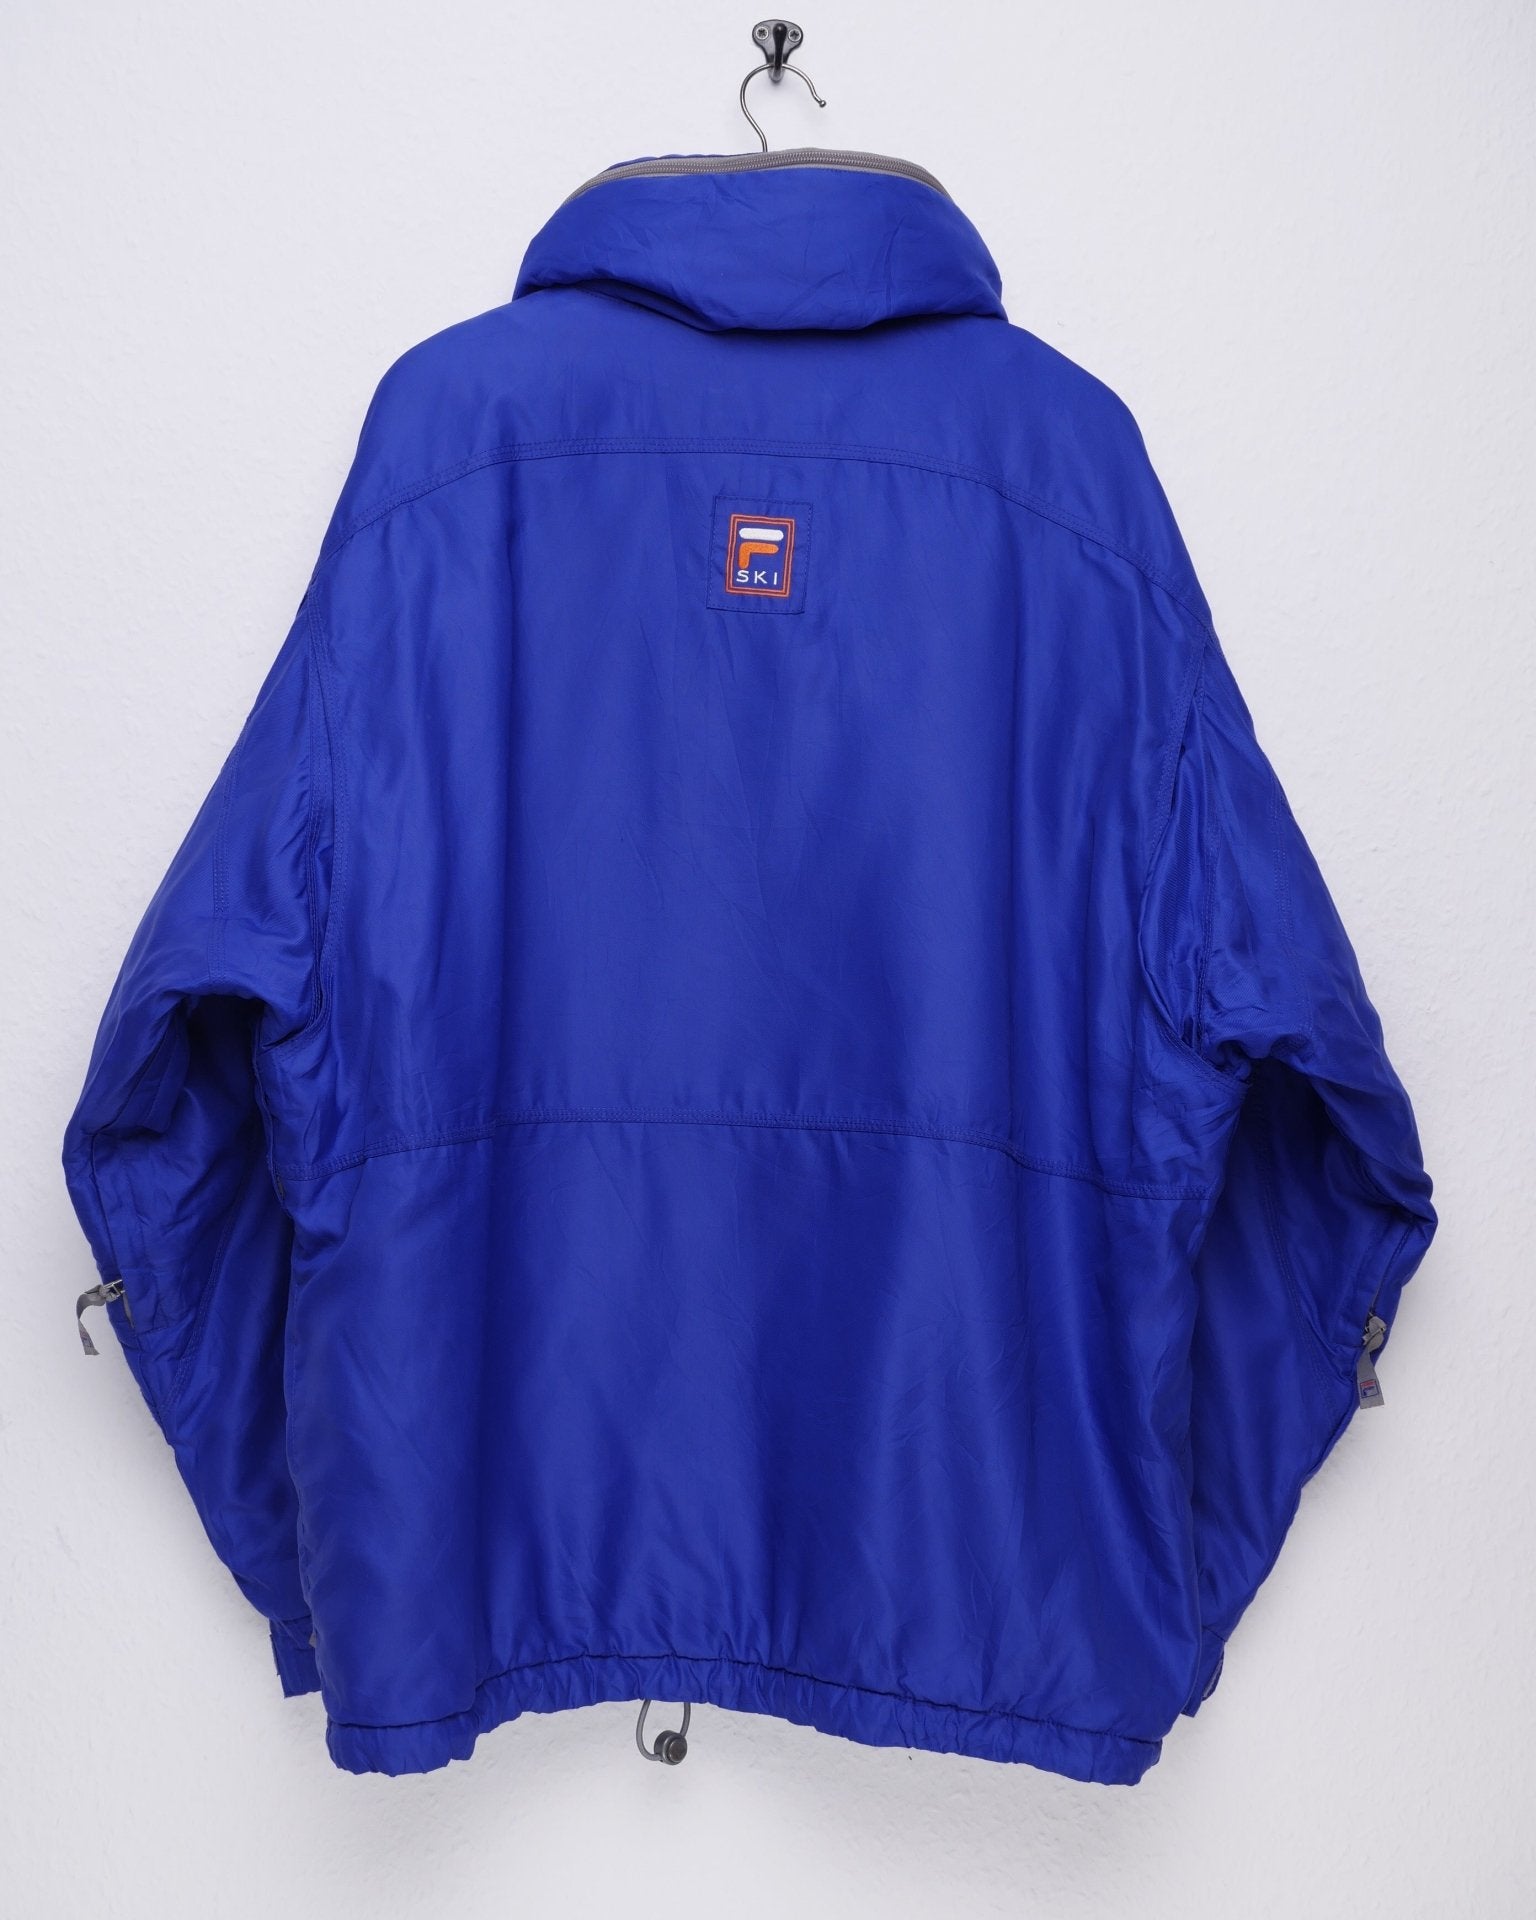 fila embroidered Spellout Vintage heavy Jacke - Peeces